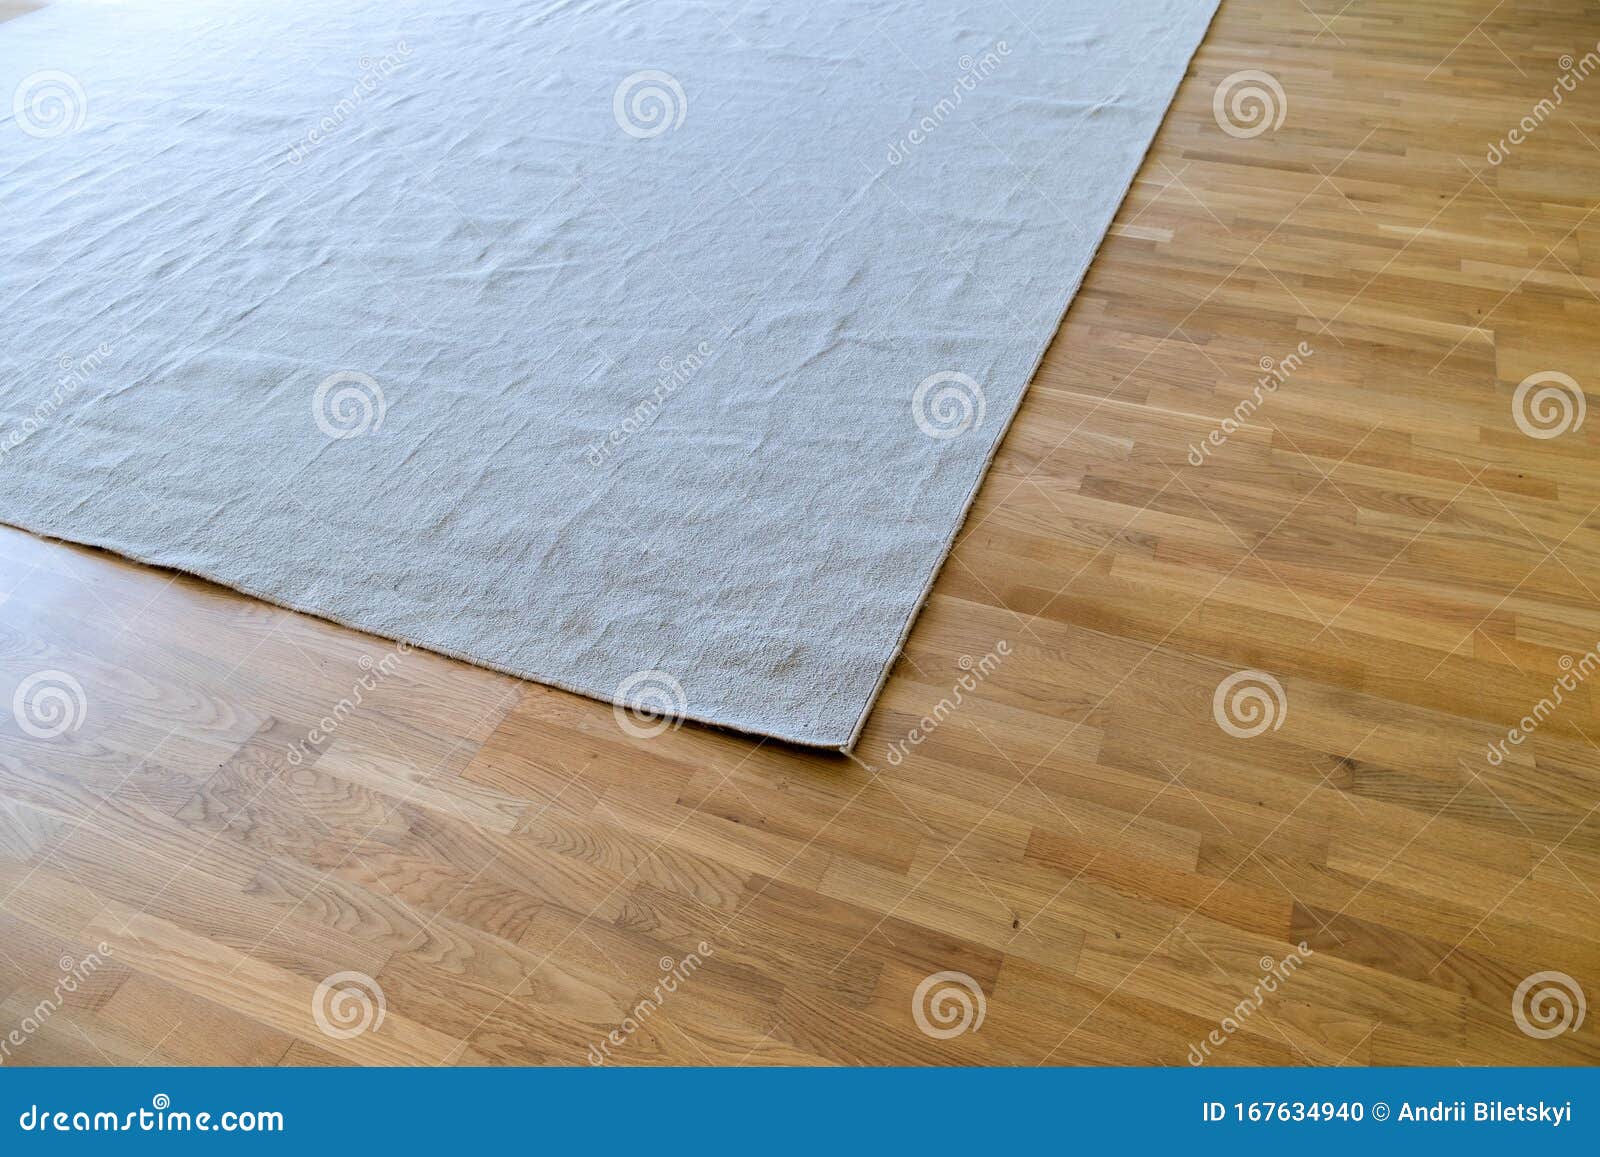 Close Up Of Crumpled Carpet Laying On Parquet Wooden Floor Stock